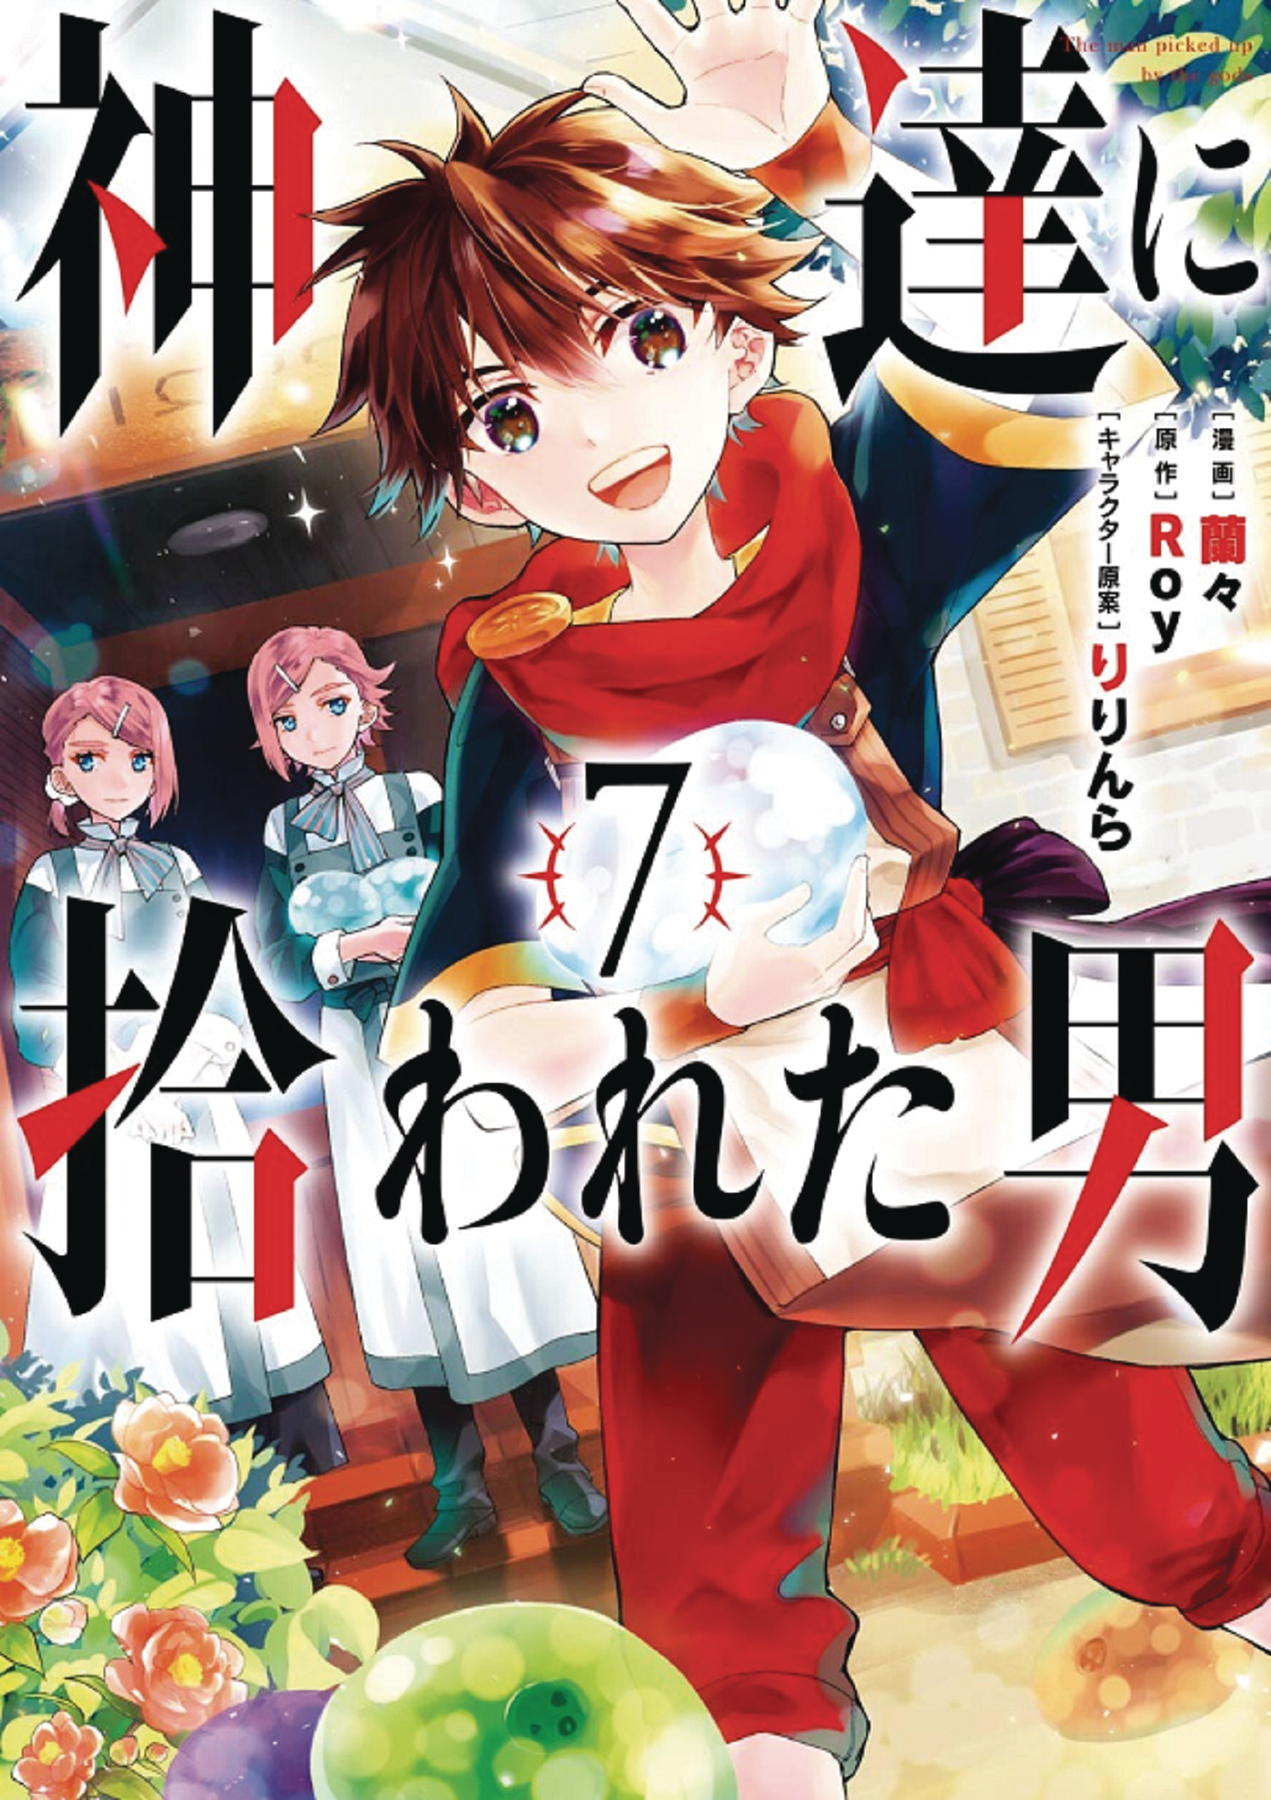 By the Grace of the Gods Manga Volume 7